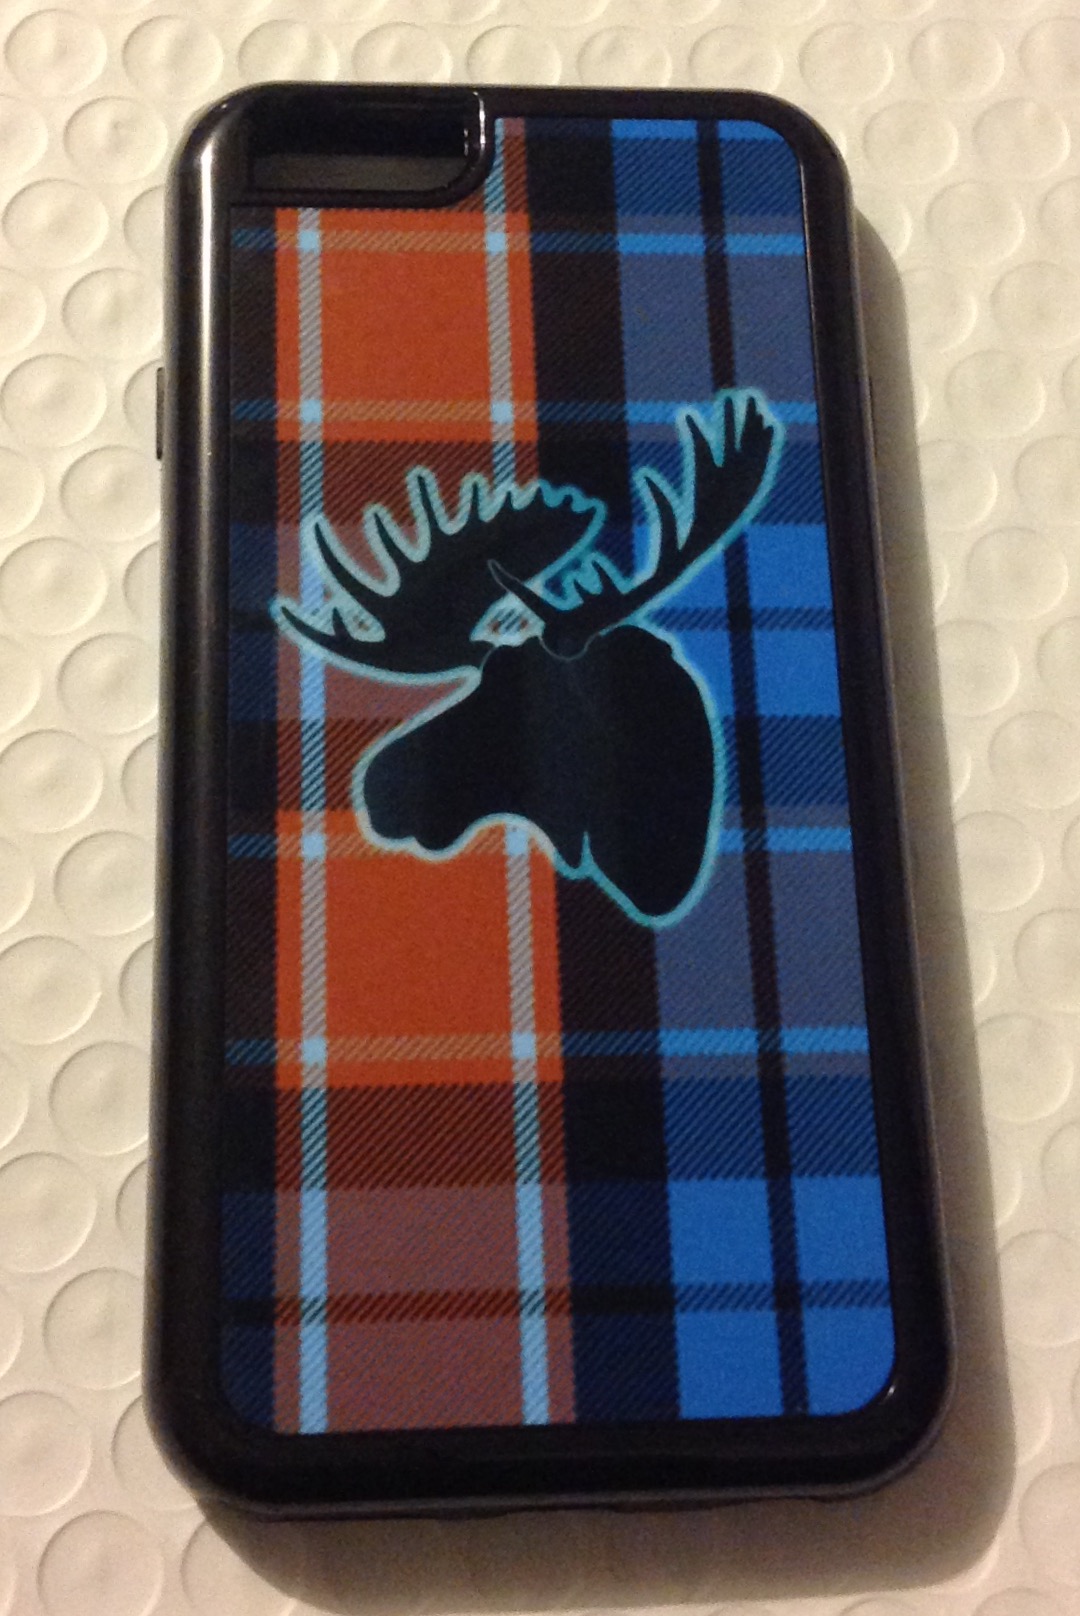 Moose and Tartan made with sublimation printing